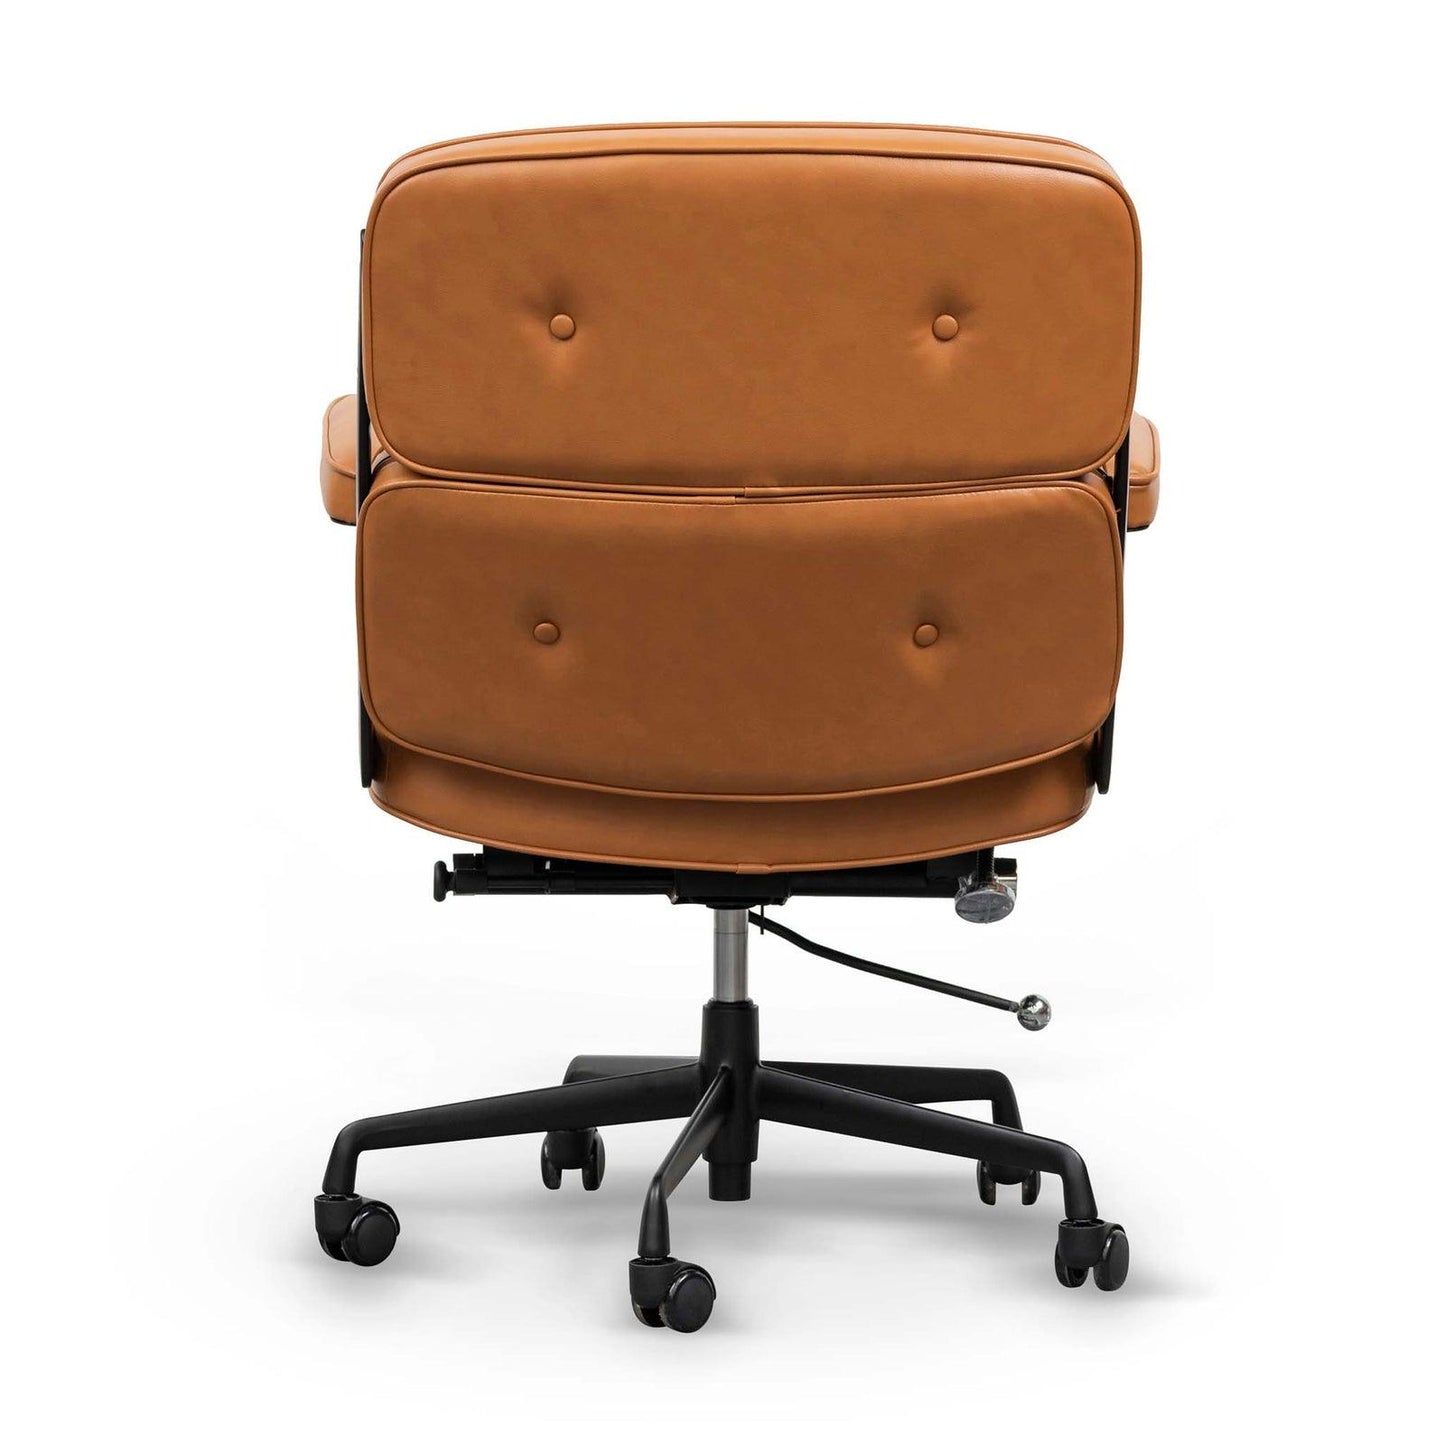 Office Chair - Honey Tan - Office/Gaming ChairsOC8206-YS 5